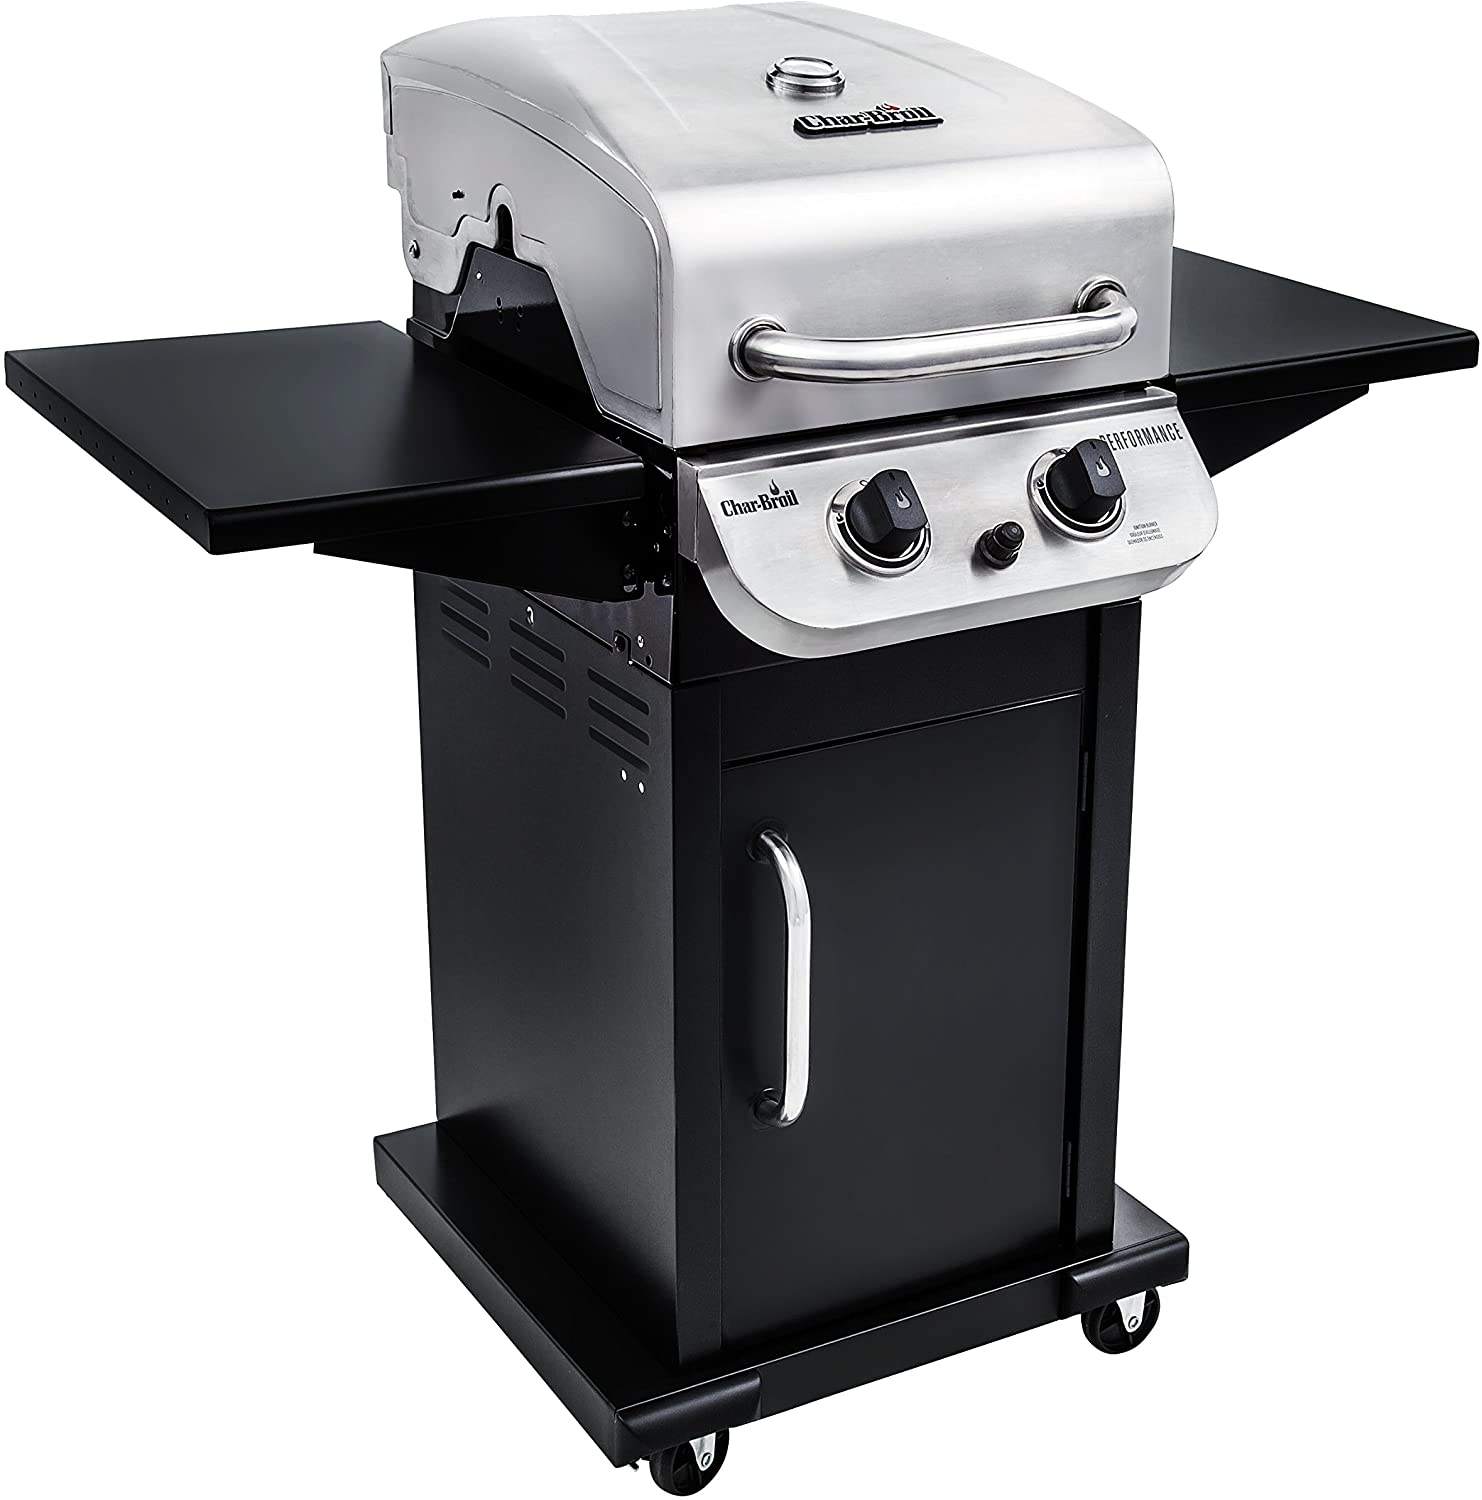 Char-Broil Performance 300 Porcelain-Coated Propane Gas BBQ Grill